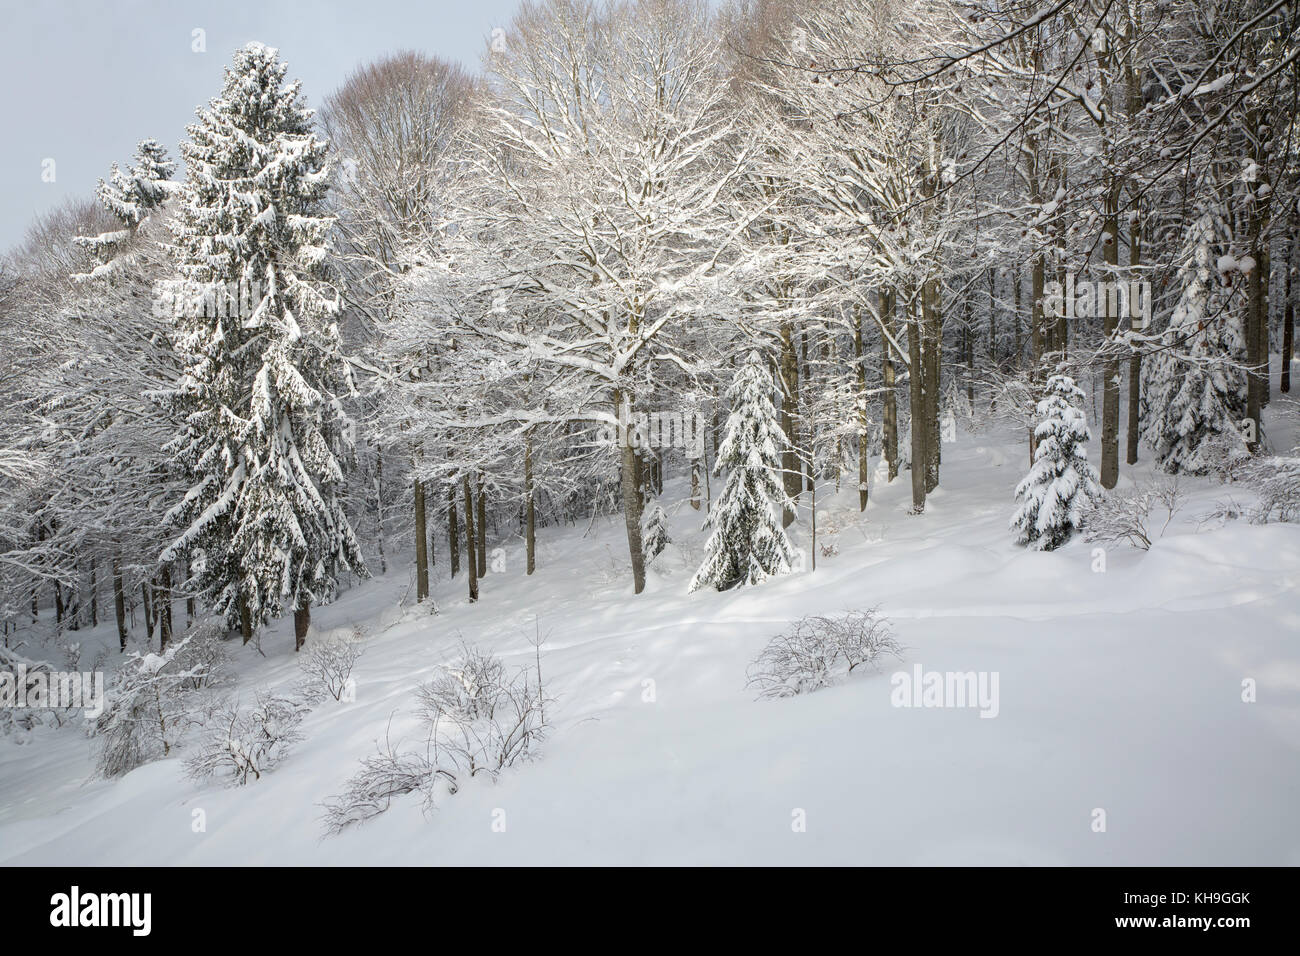 Branches of beech trees (Fagus sylvatica) and spruces laden with fresh snow after snowfall in winter Stock Photo